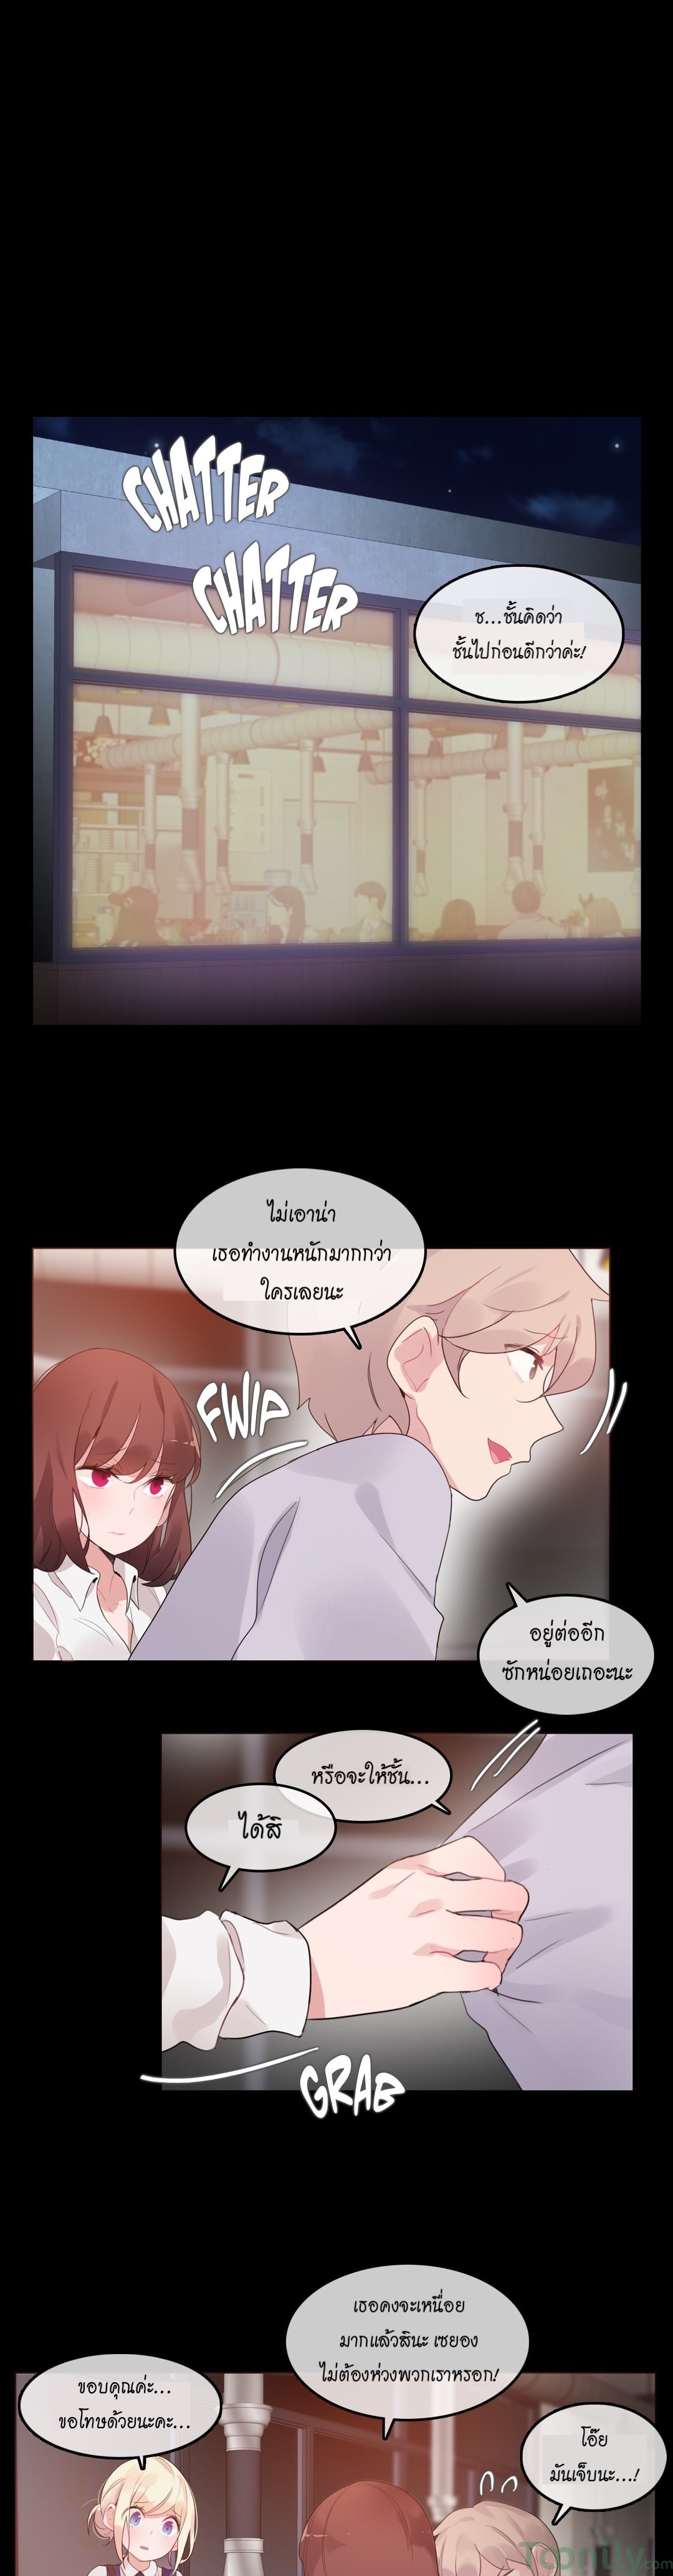 A Pervert’s Daily Life62 (13)